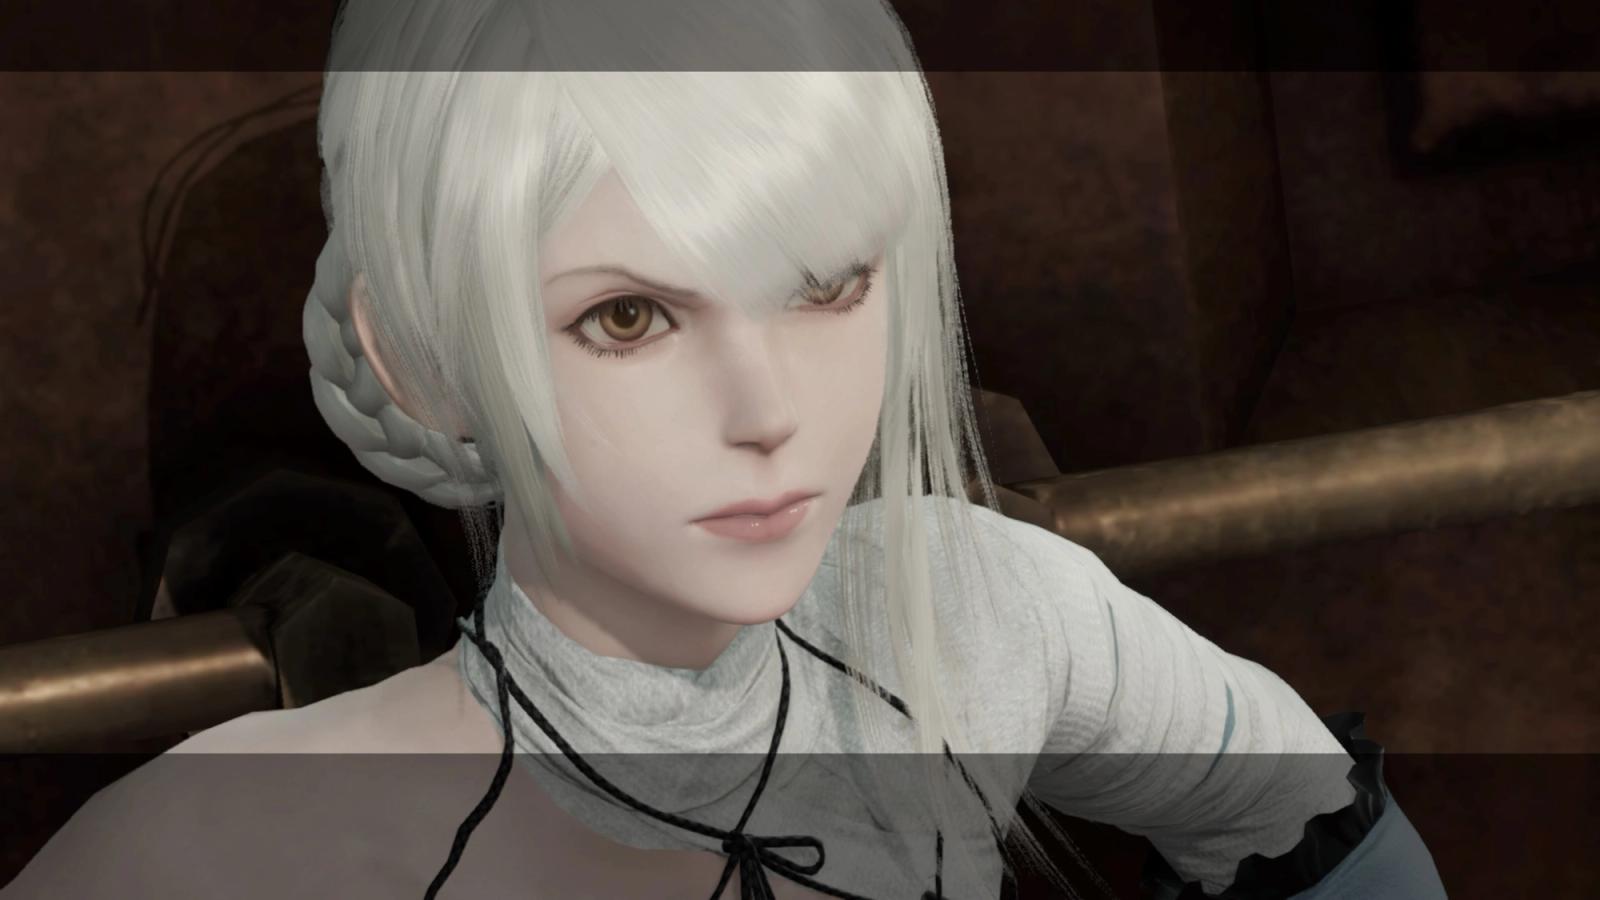 A screenshot from NieR Replicant showing a character backed up against a wall.